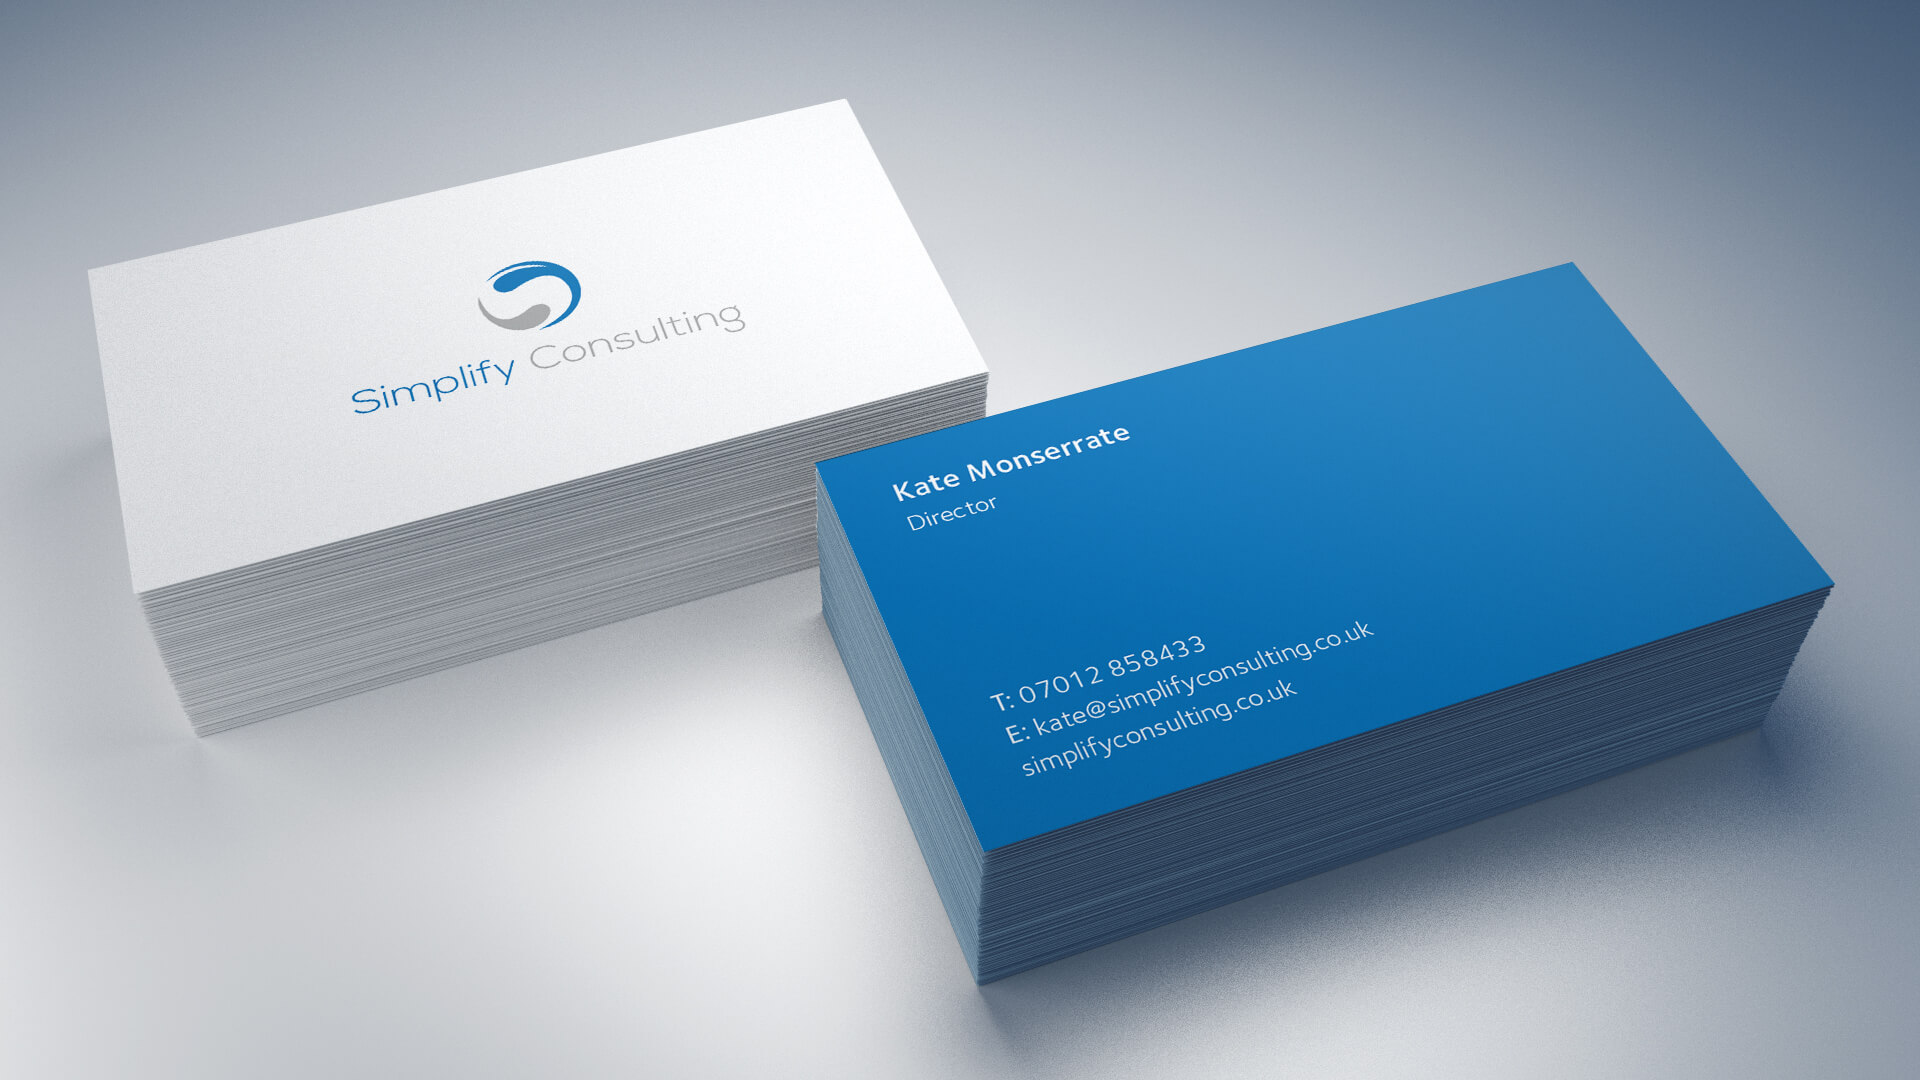 Simplify Consulting Business Cards